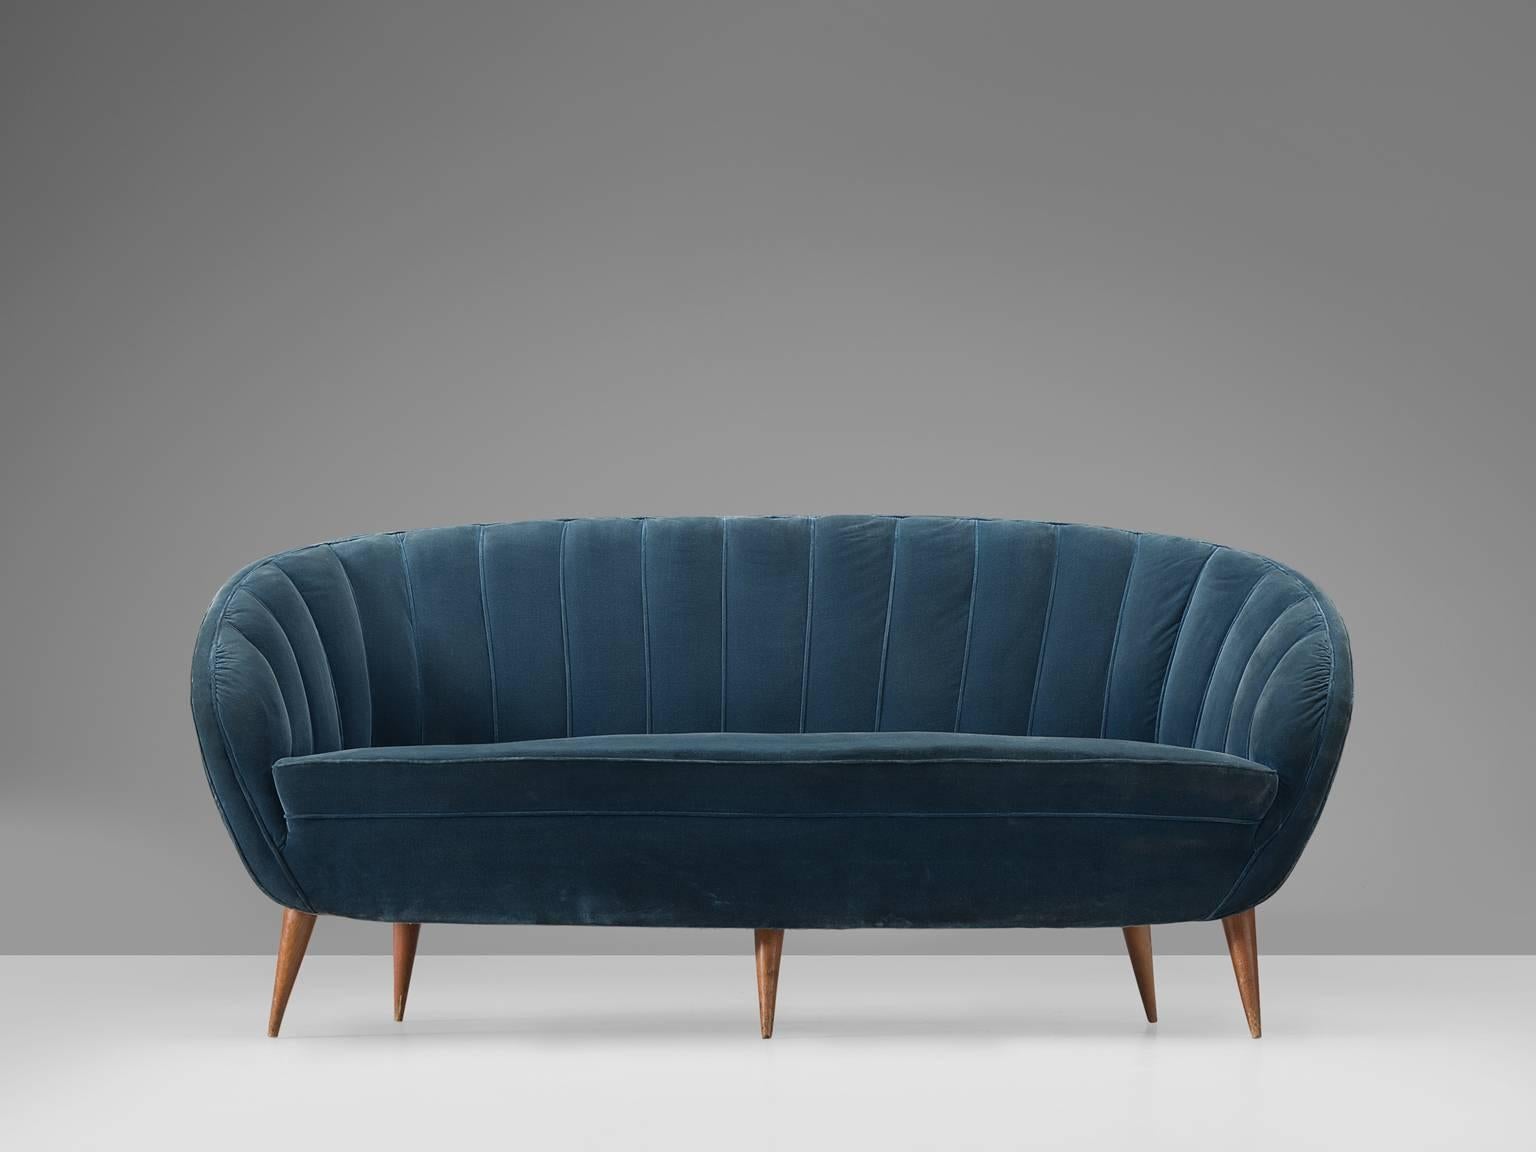 Settee, presumably by ISA, blue velvet and oak, Italy, 1950s. 

This ornate, cute but grand sofa is strong and playful at the same time. The webbed back gives perfect support for the sitter. The delicate oak legs support the voluptuous seat, which